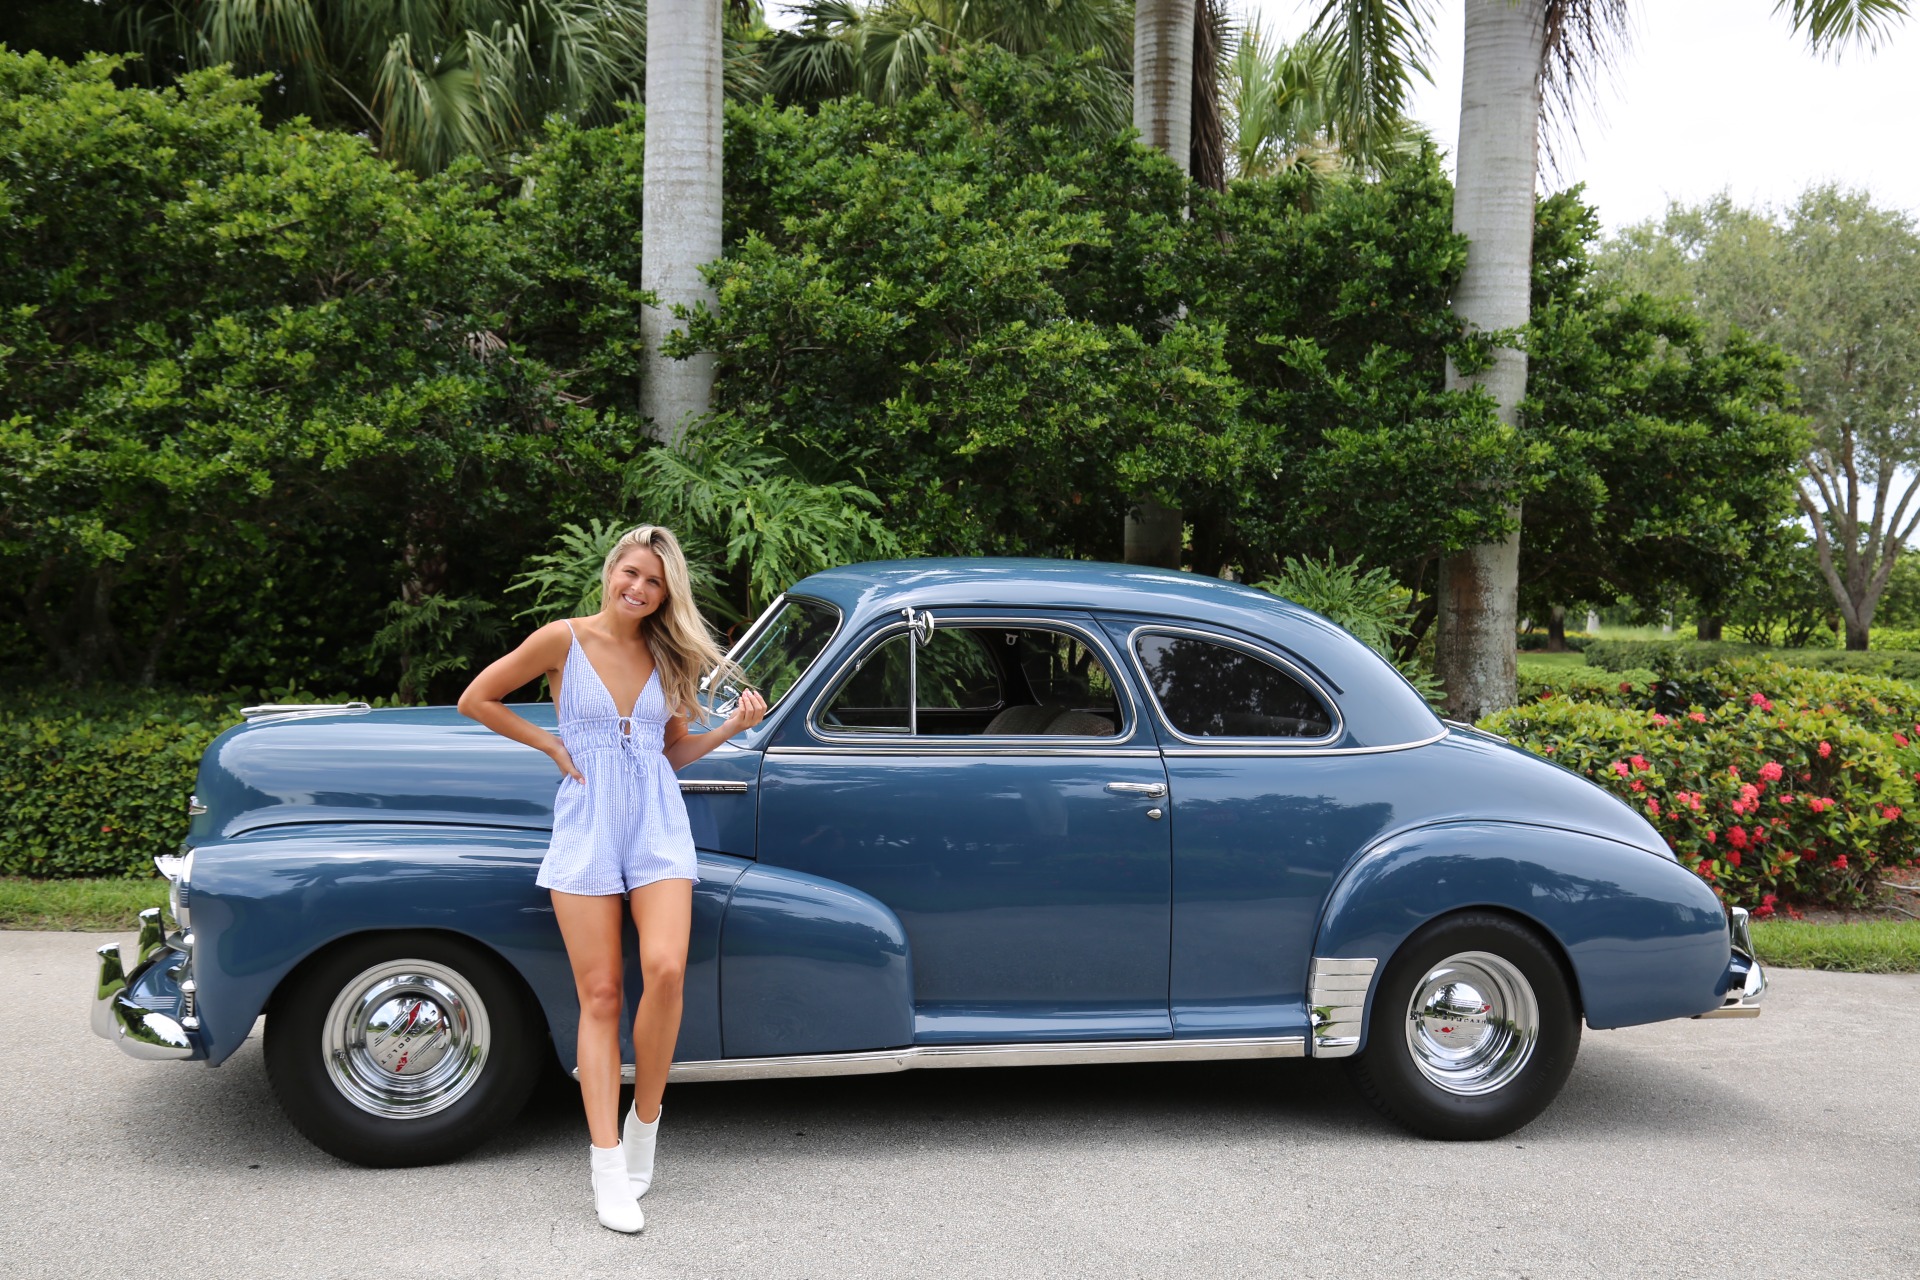 Used 1948 Chevrolet Fleetmaster Restomod for sale Sold at Muscle Cars for Sale Inc. in Fort Myers FL 33912 4